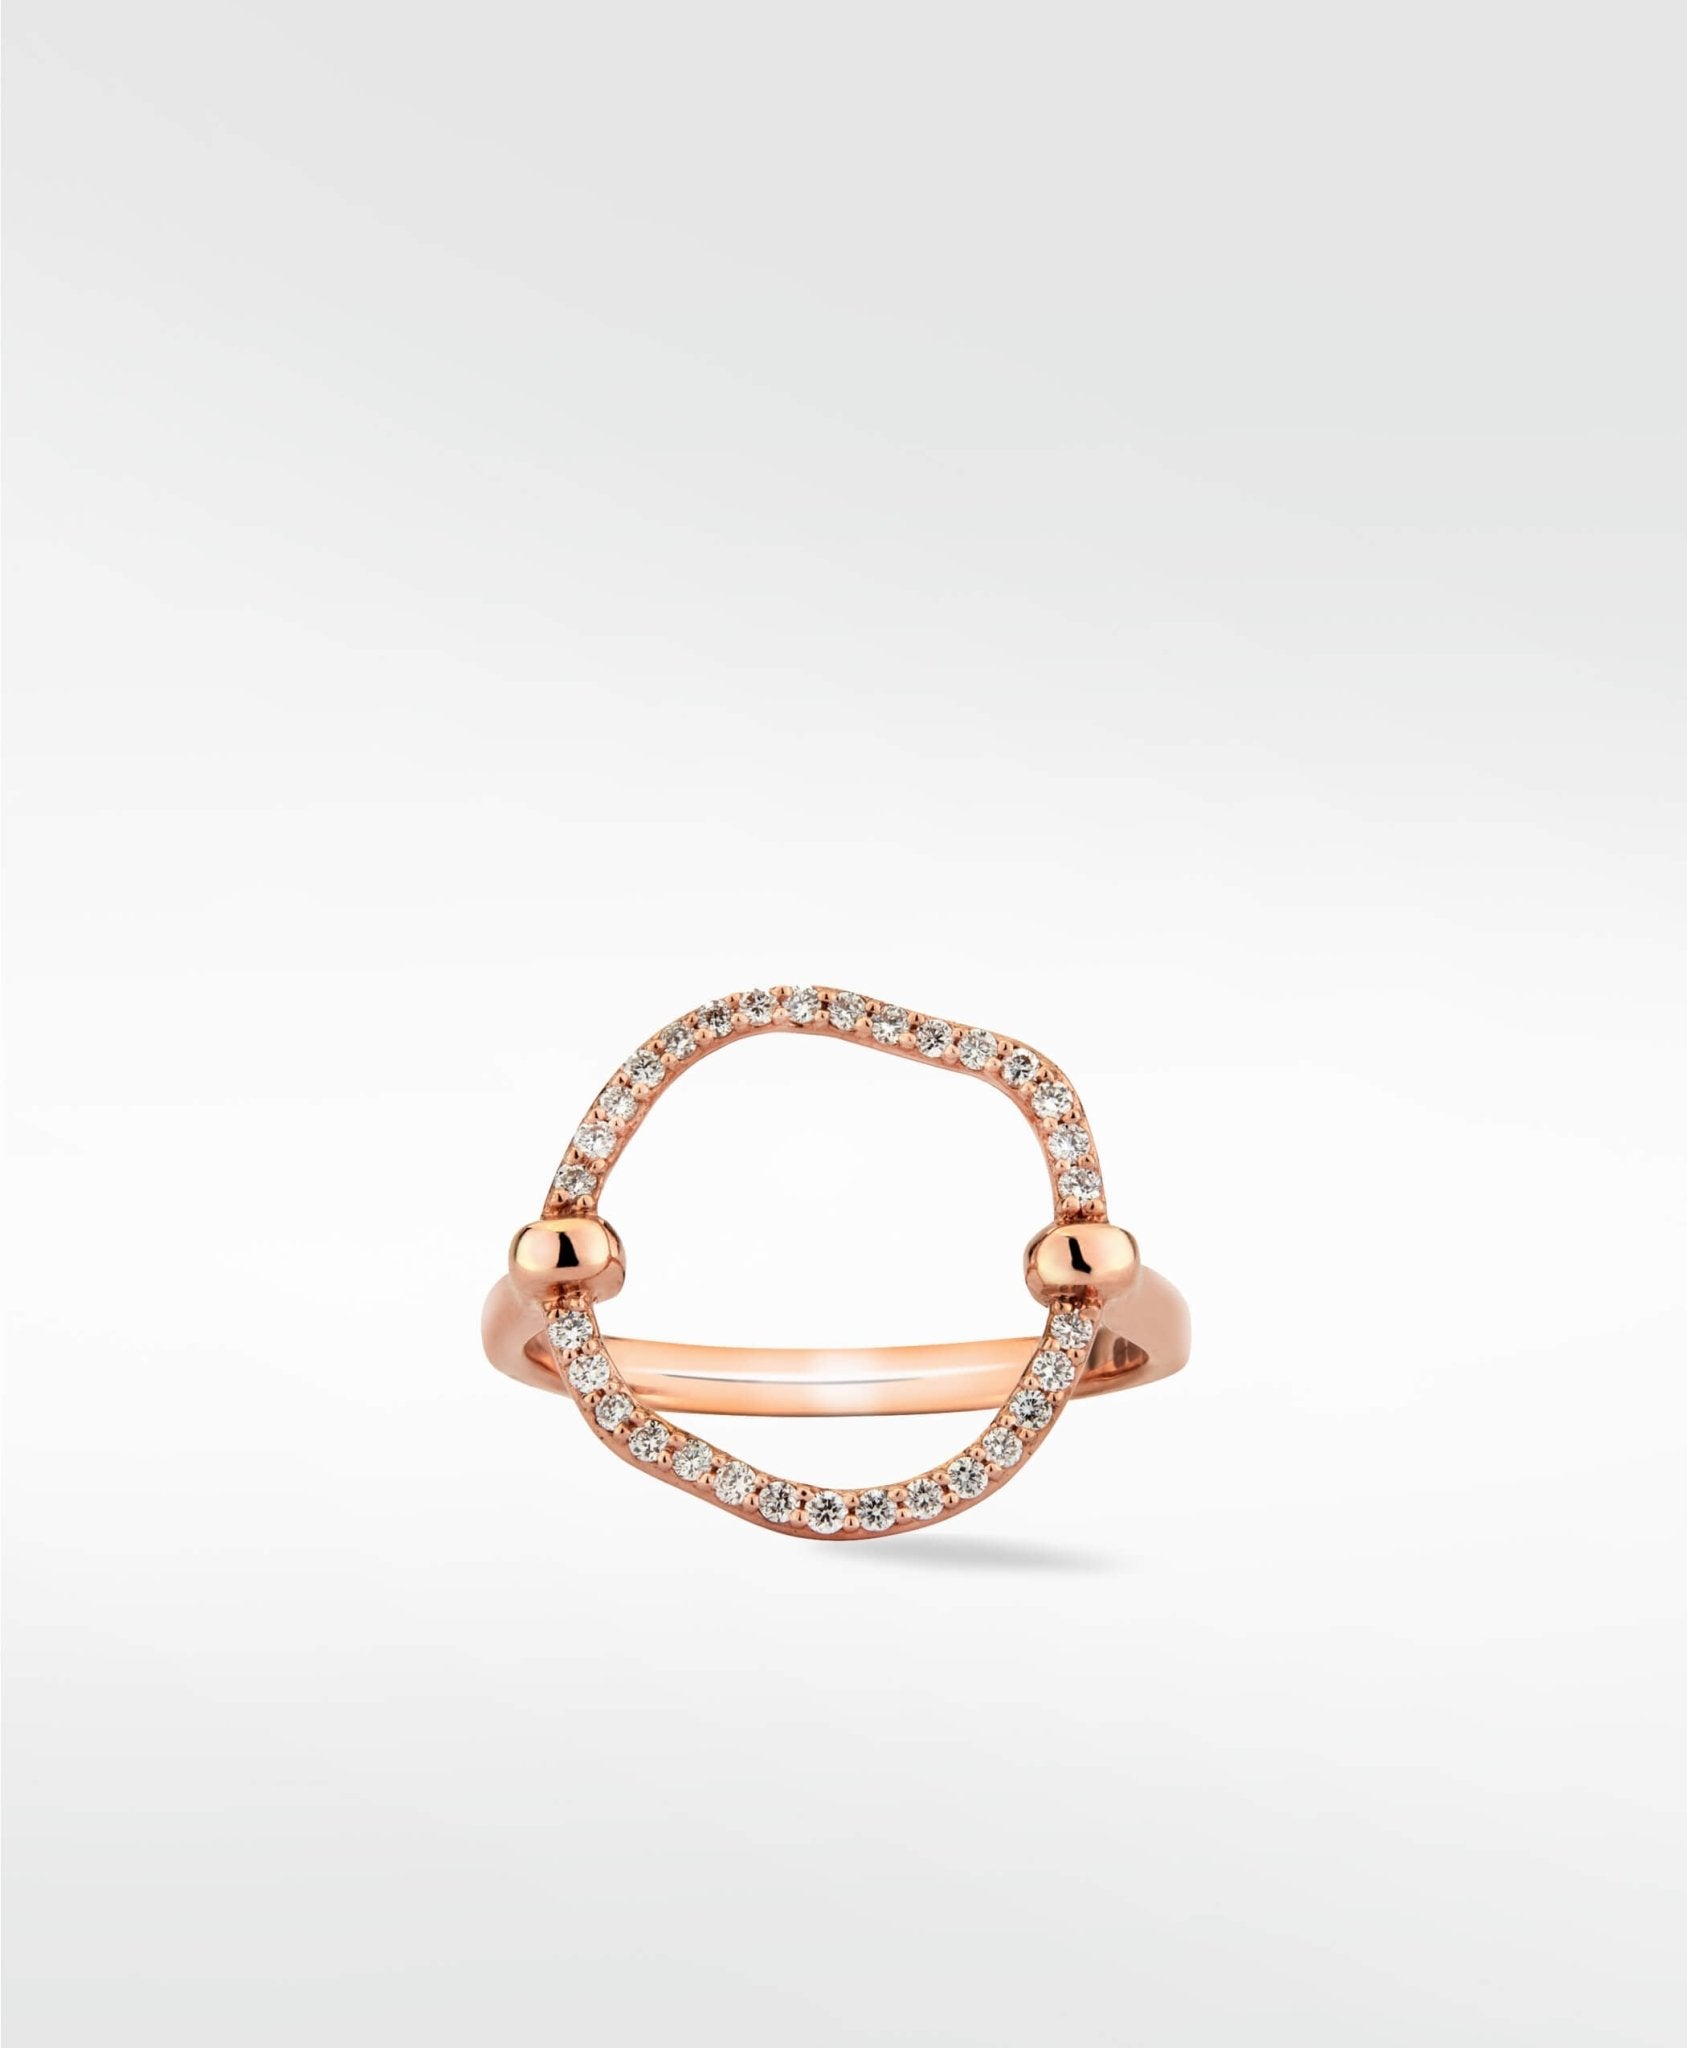 Halo Diamond Ring in 14K Rose Gold - Lark and Berry